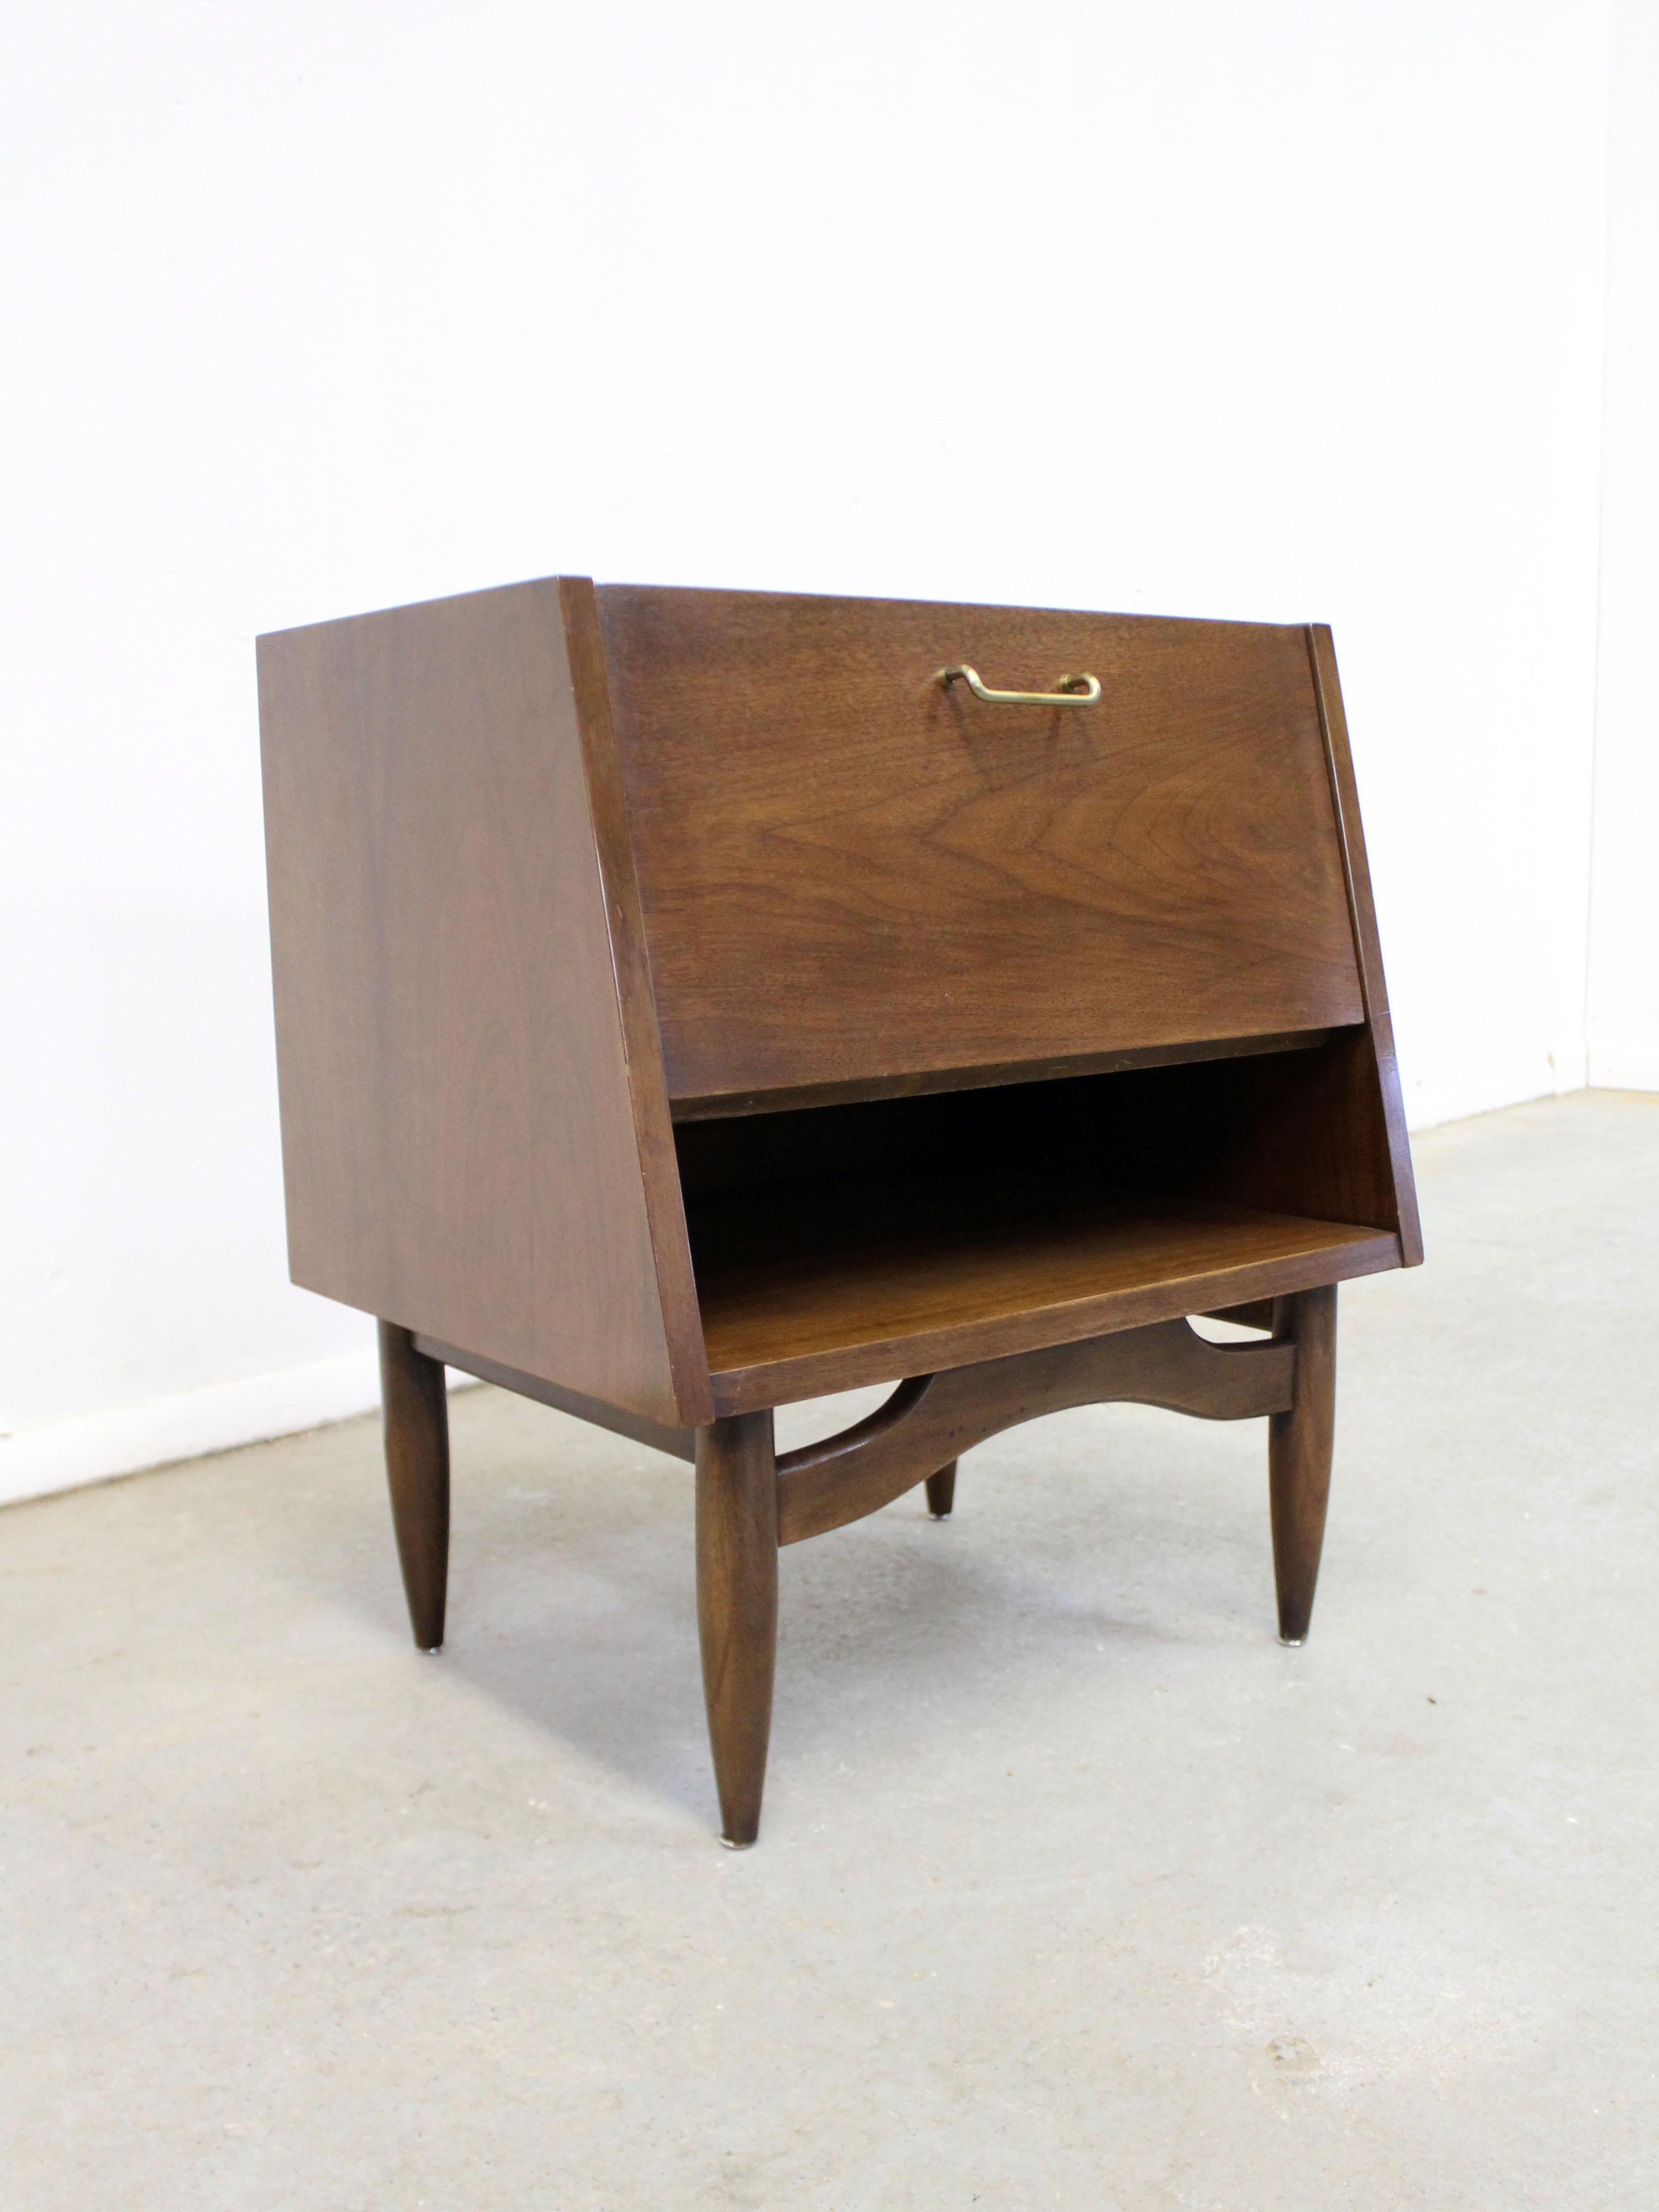 Offered is a walnut nightstand, designed by Merton L. Gershun for American of Martinsville's 